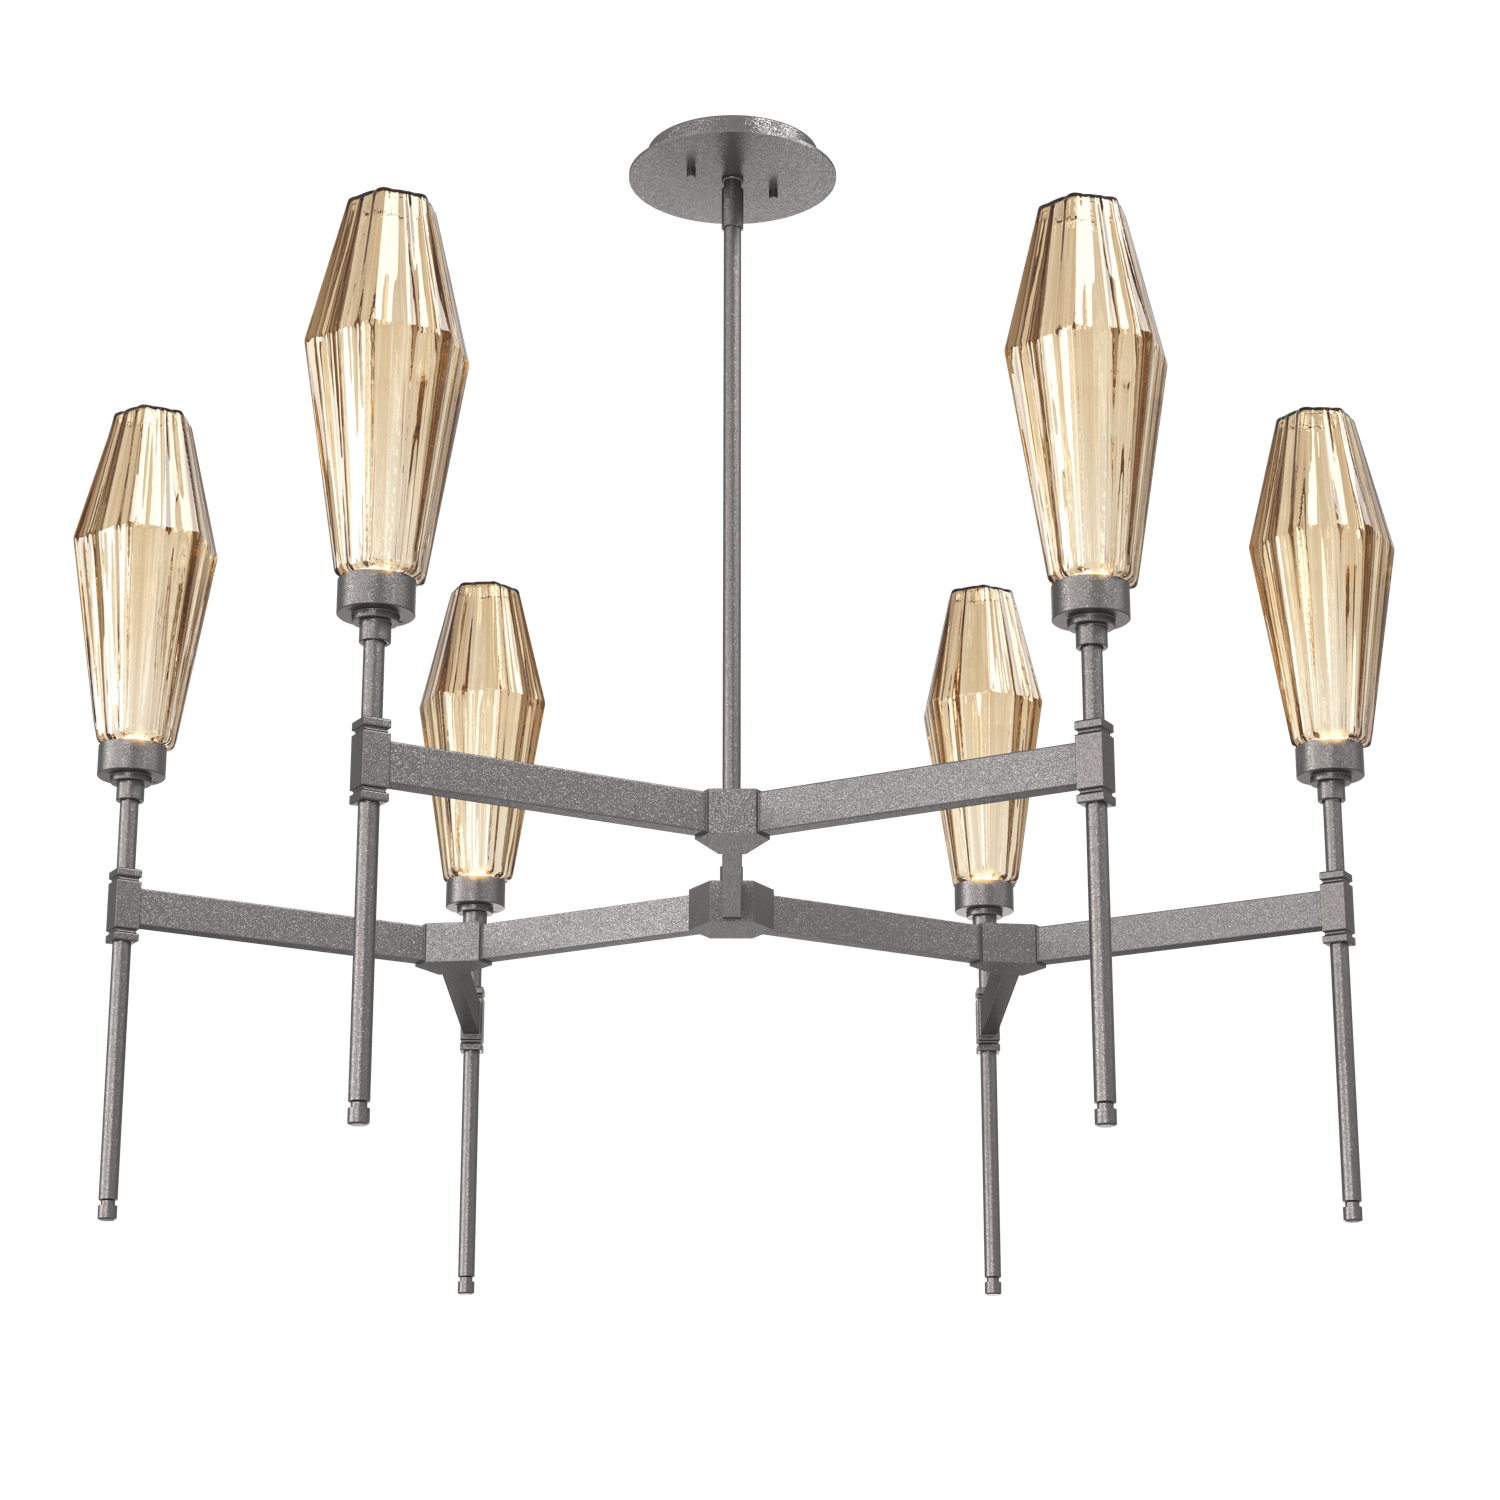 CHB0049-37-GP-RB-Hammerton-Studio-Aalto-37-inch-round-belvedere-chandelier-with-graphite-finish-and-optic-ribbed-bronze-glass-shades-and-LED-lamping